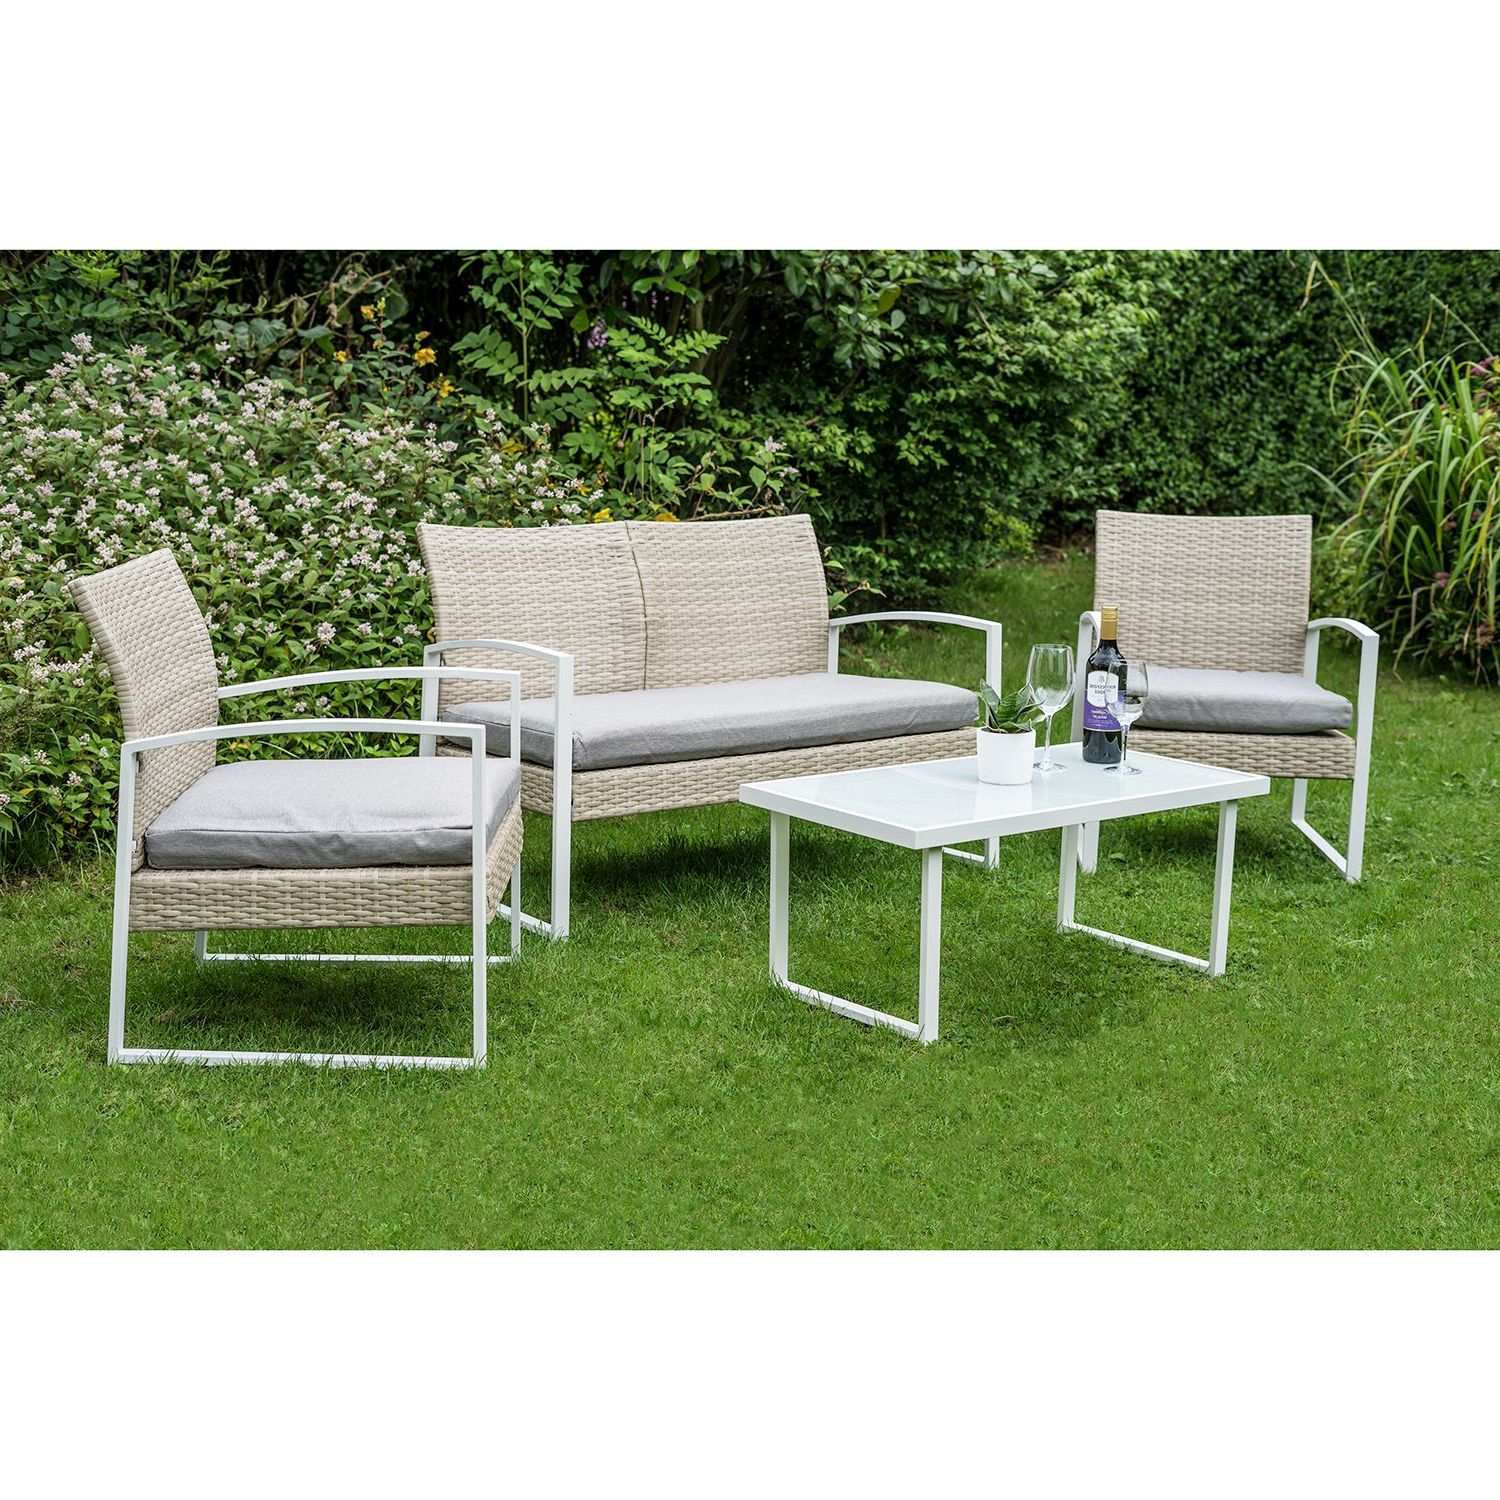 Most Recent 4 Piece Rattan Patio Outdoor Furniture Set With Grey Cushions & Table Within 4 Piece Gray Outdoor Patio Seating Sets (View 5 of 15)